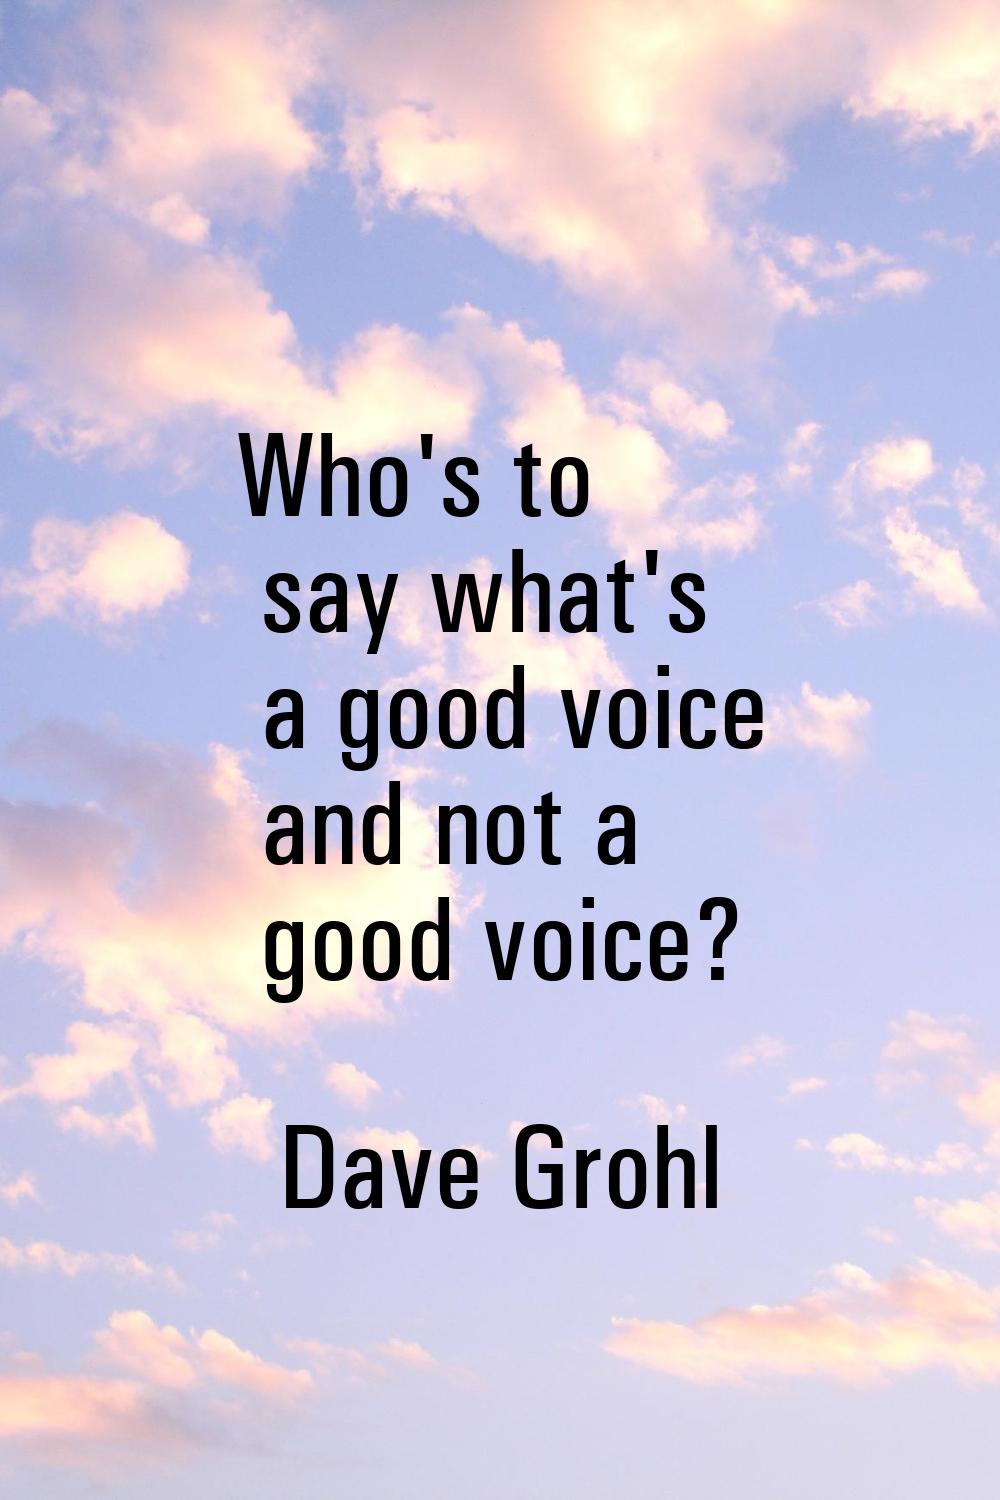 Who's to say what's a good voice and not a good voice?